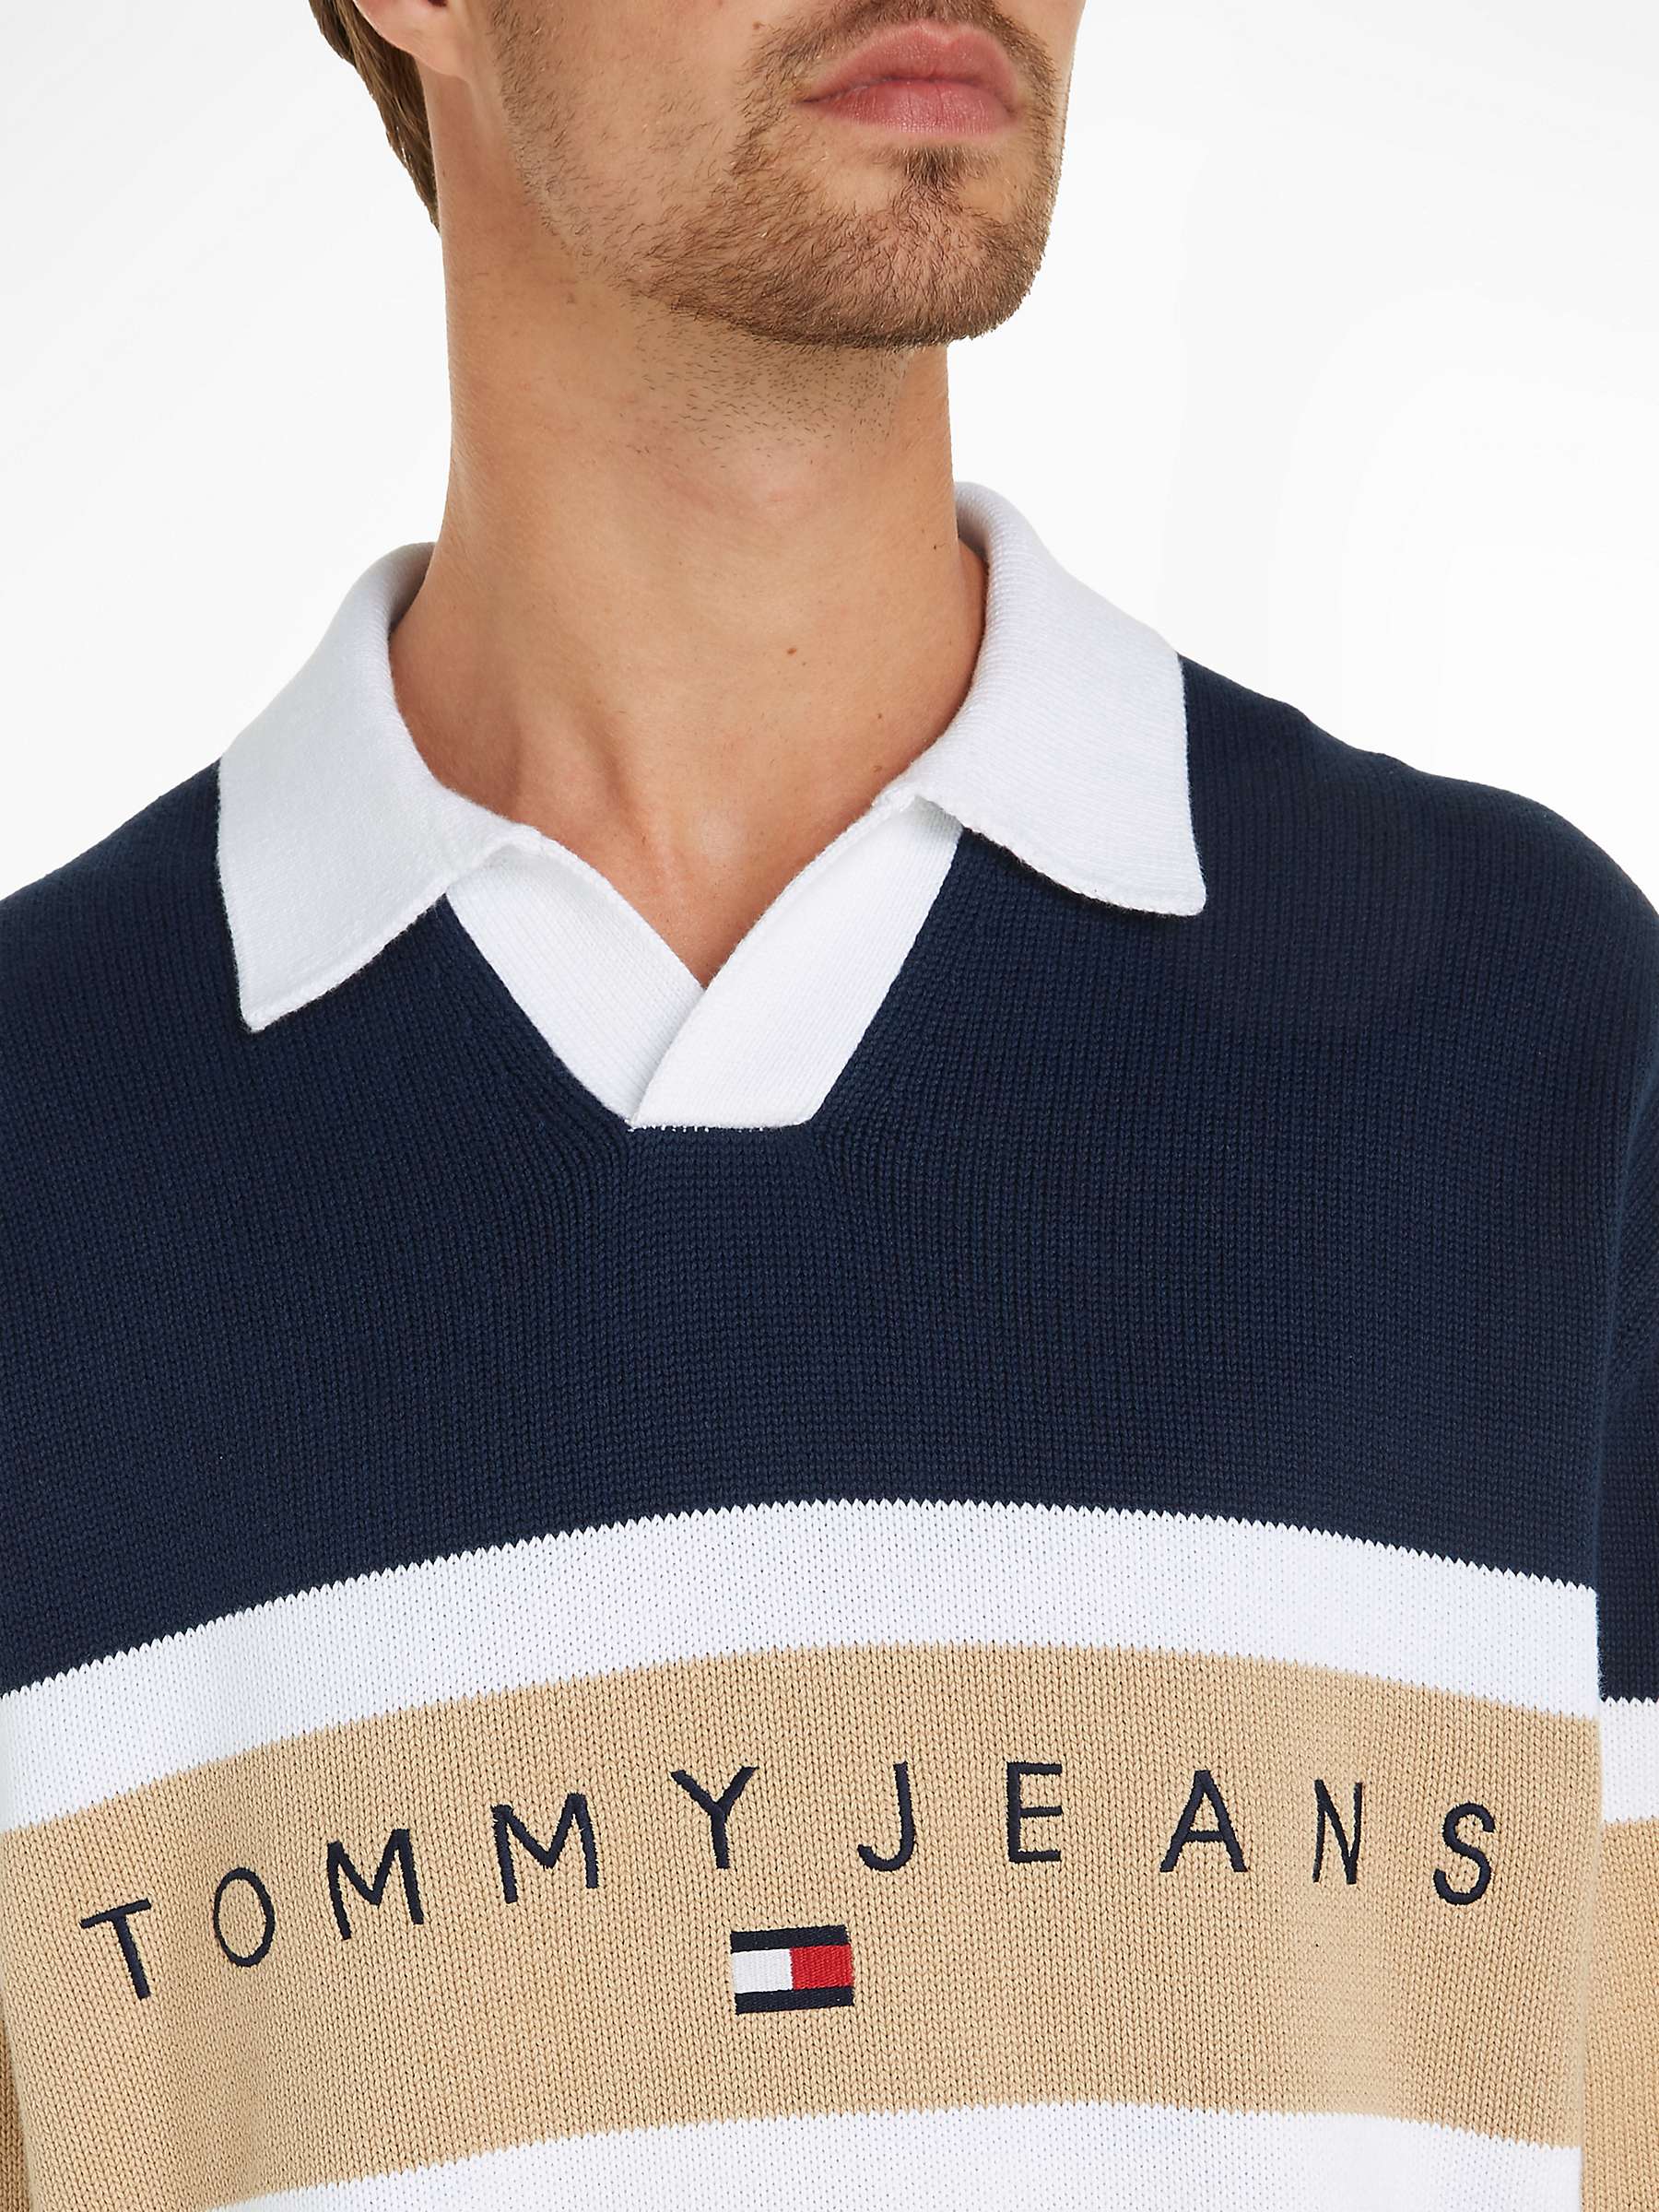 Buy Tommy Hilfiger Organic Cotton Relaxed Rugby Polo Shirt, Dark Night Navy Online at johnlewis.com